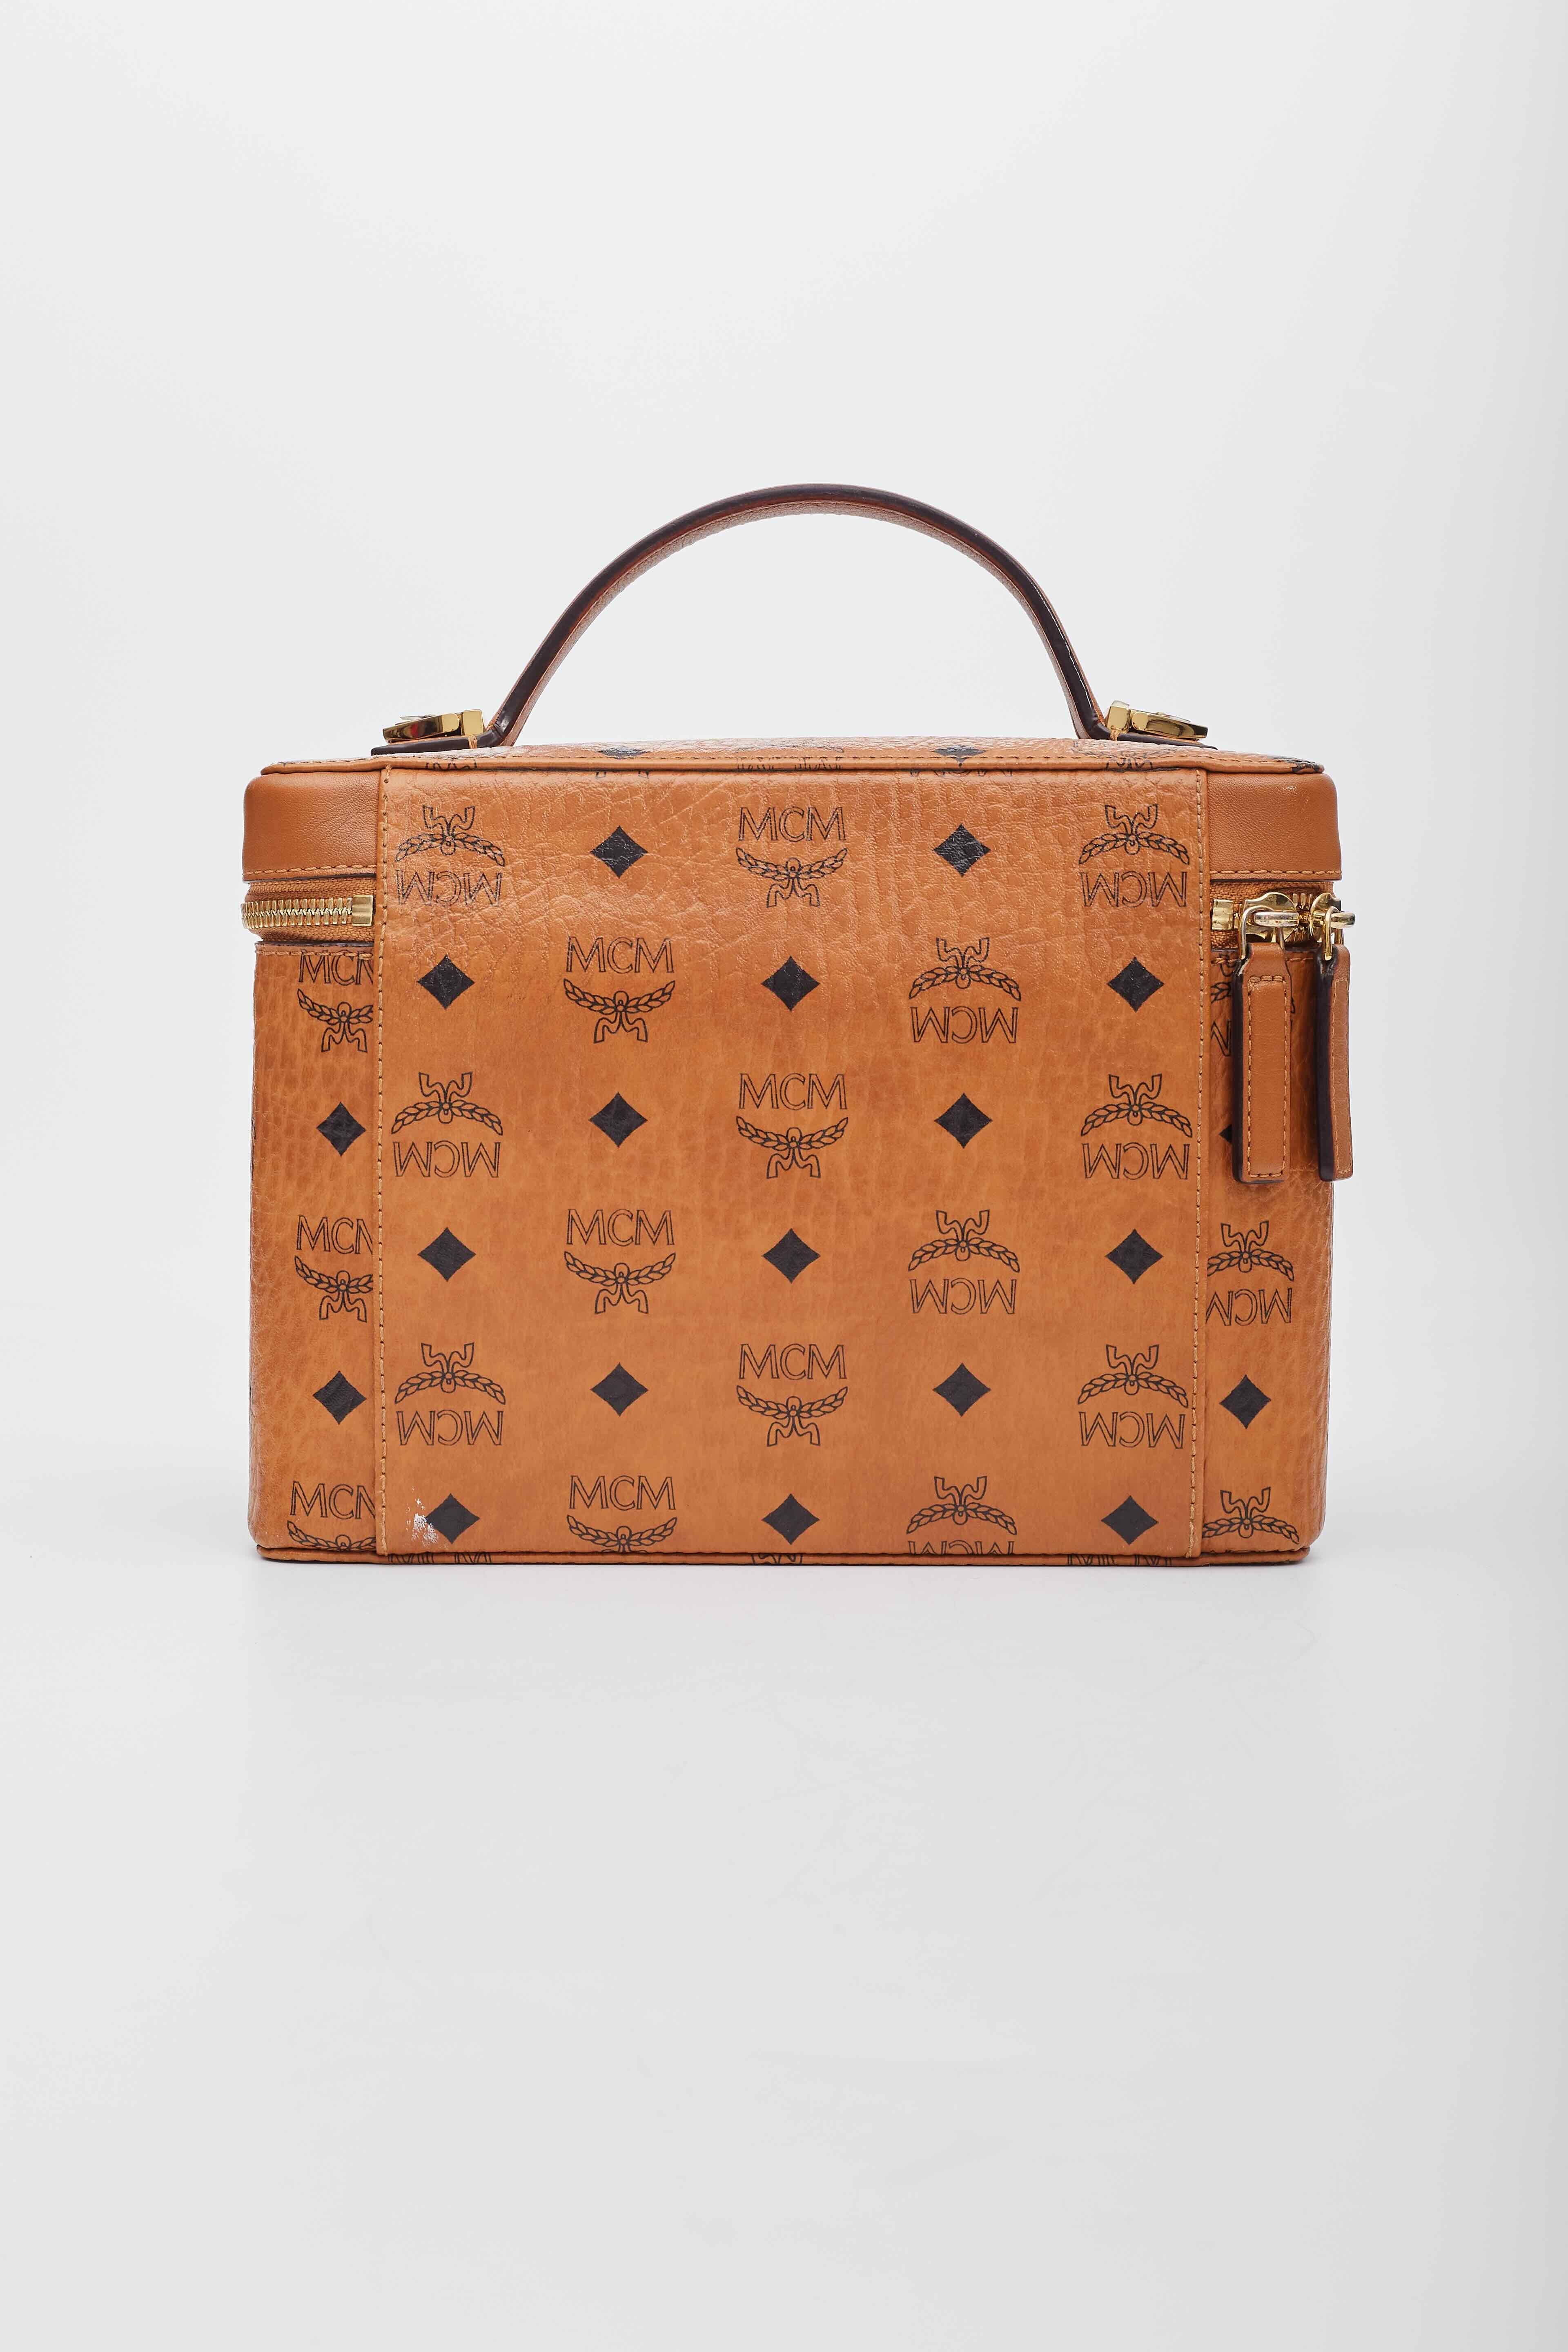 This bag is made from traditional MCM monogram visetos coated canvas. The case features a brown leather top handle and matching trim, an optional, adjustable shoulder strap and polished gold hardware. The wrap around zippers open to a beige